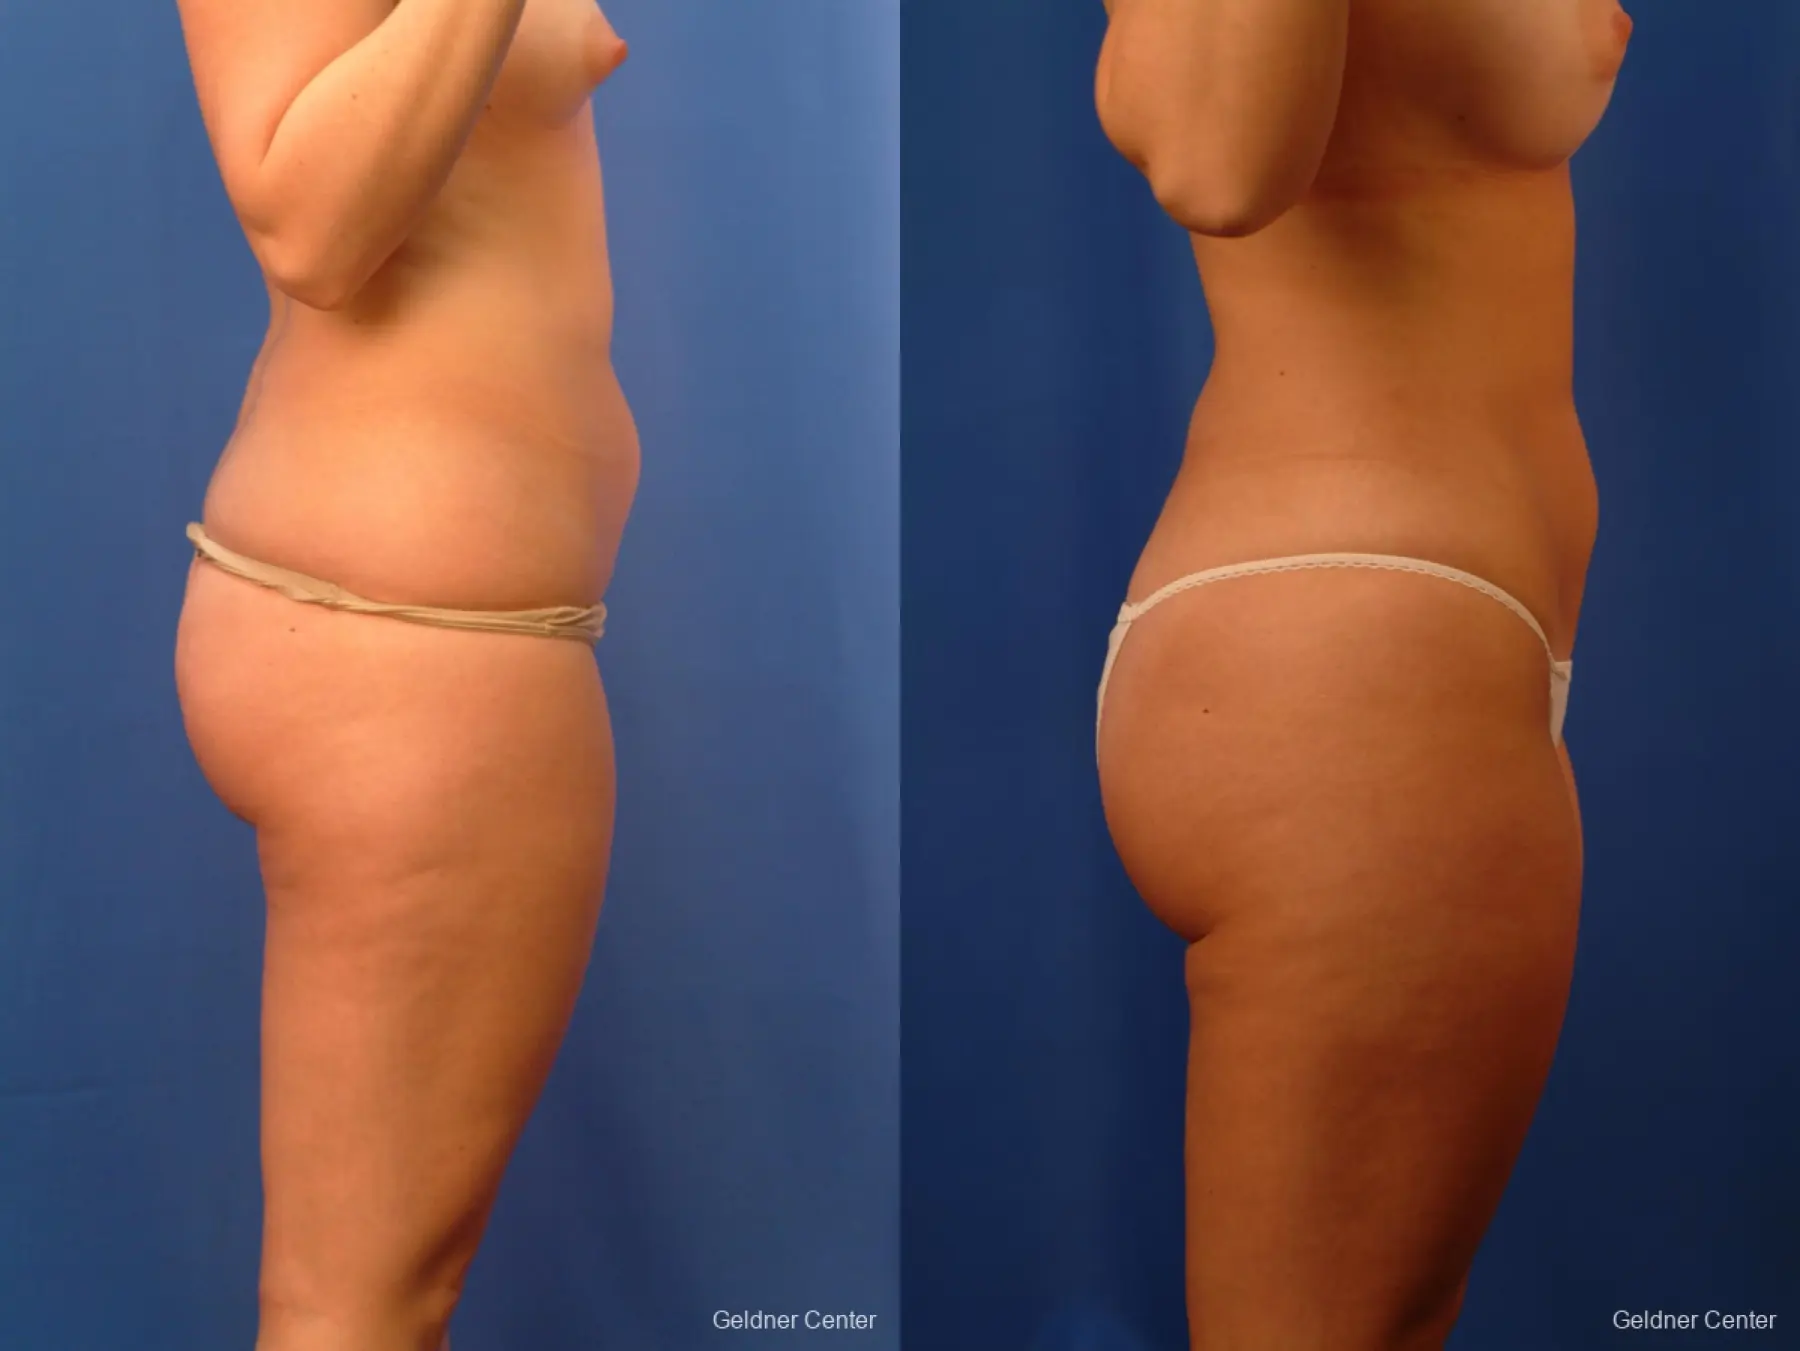 Vaser lipo patient 2516 before and after photos - Before and After 3